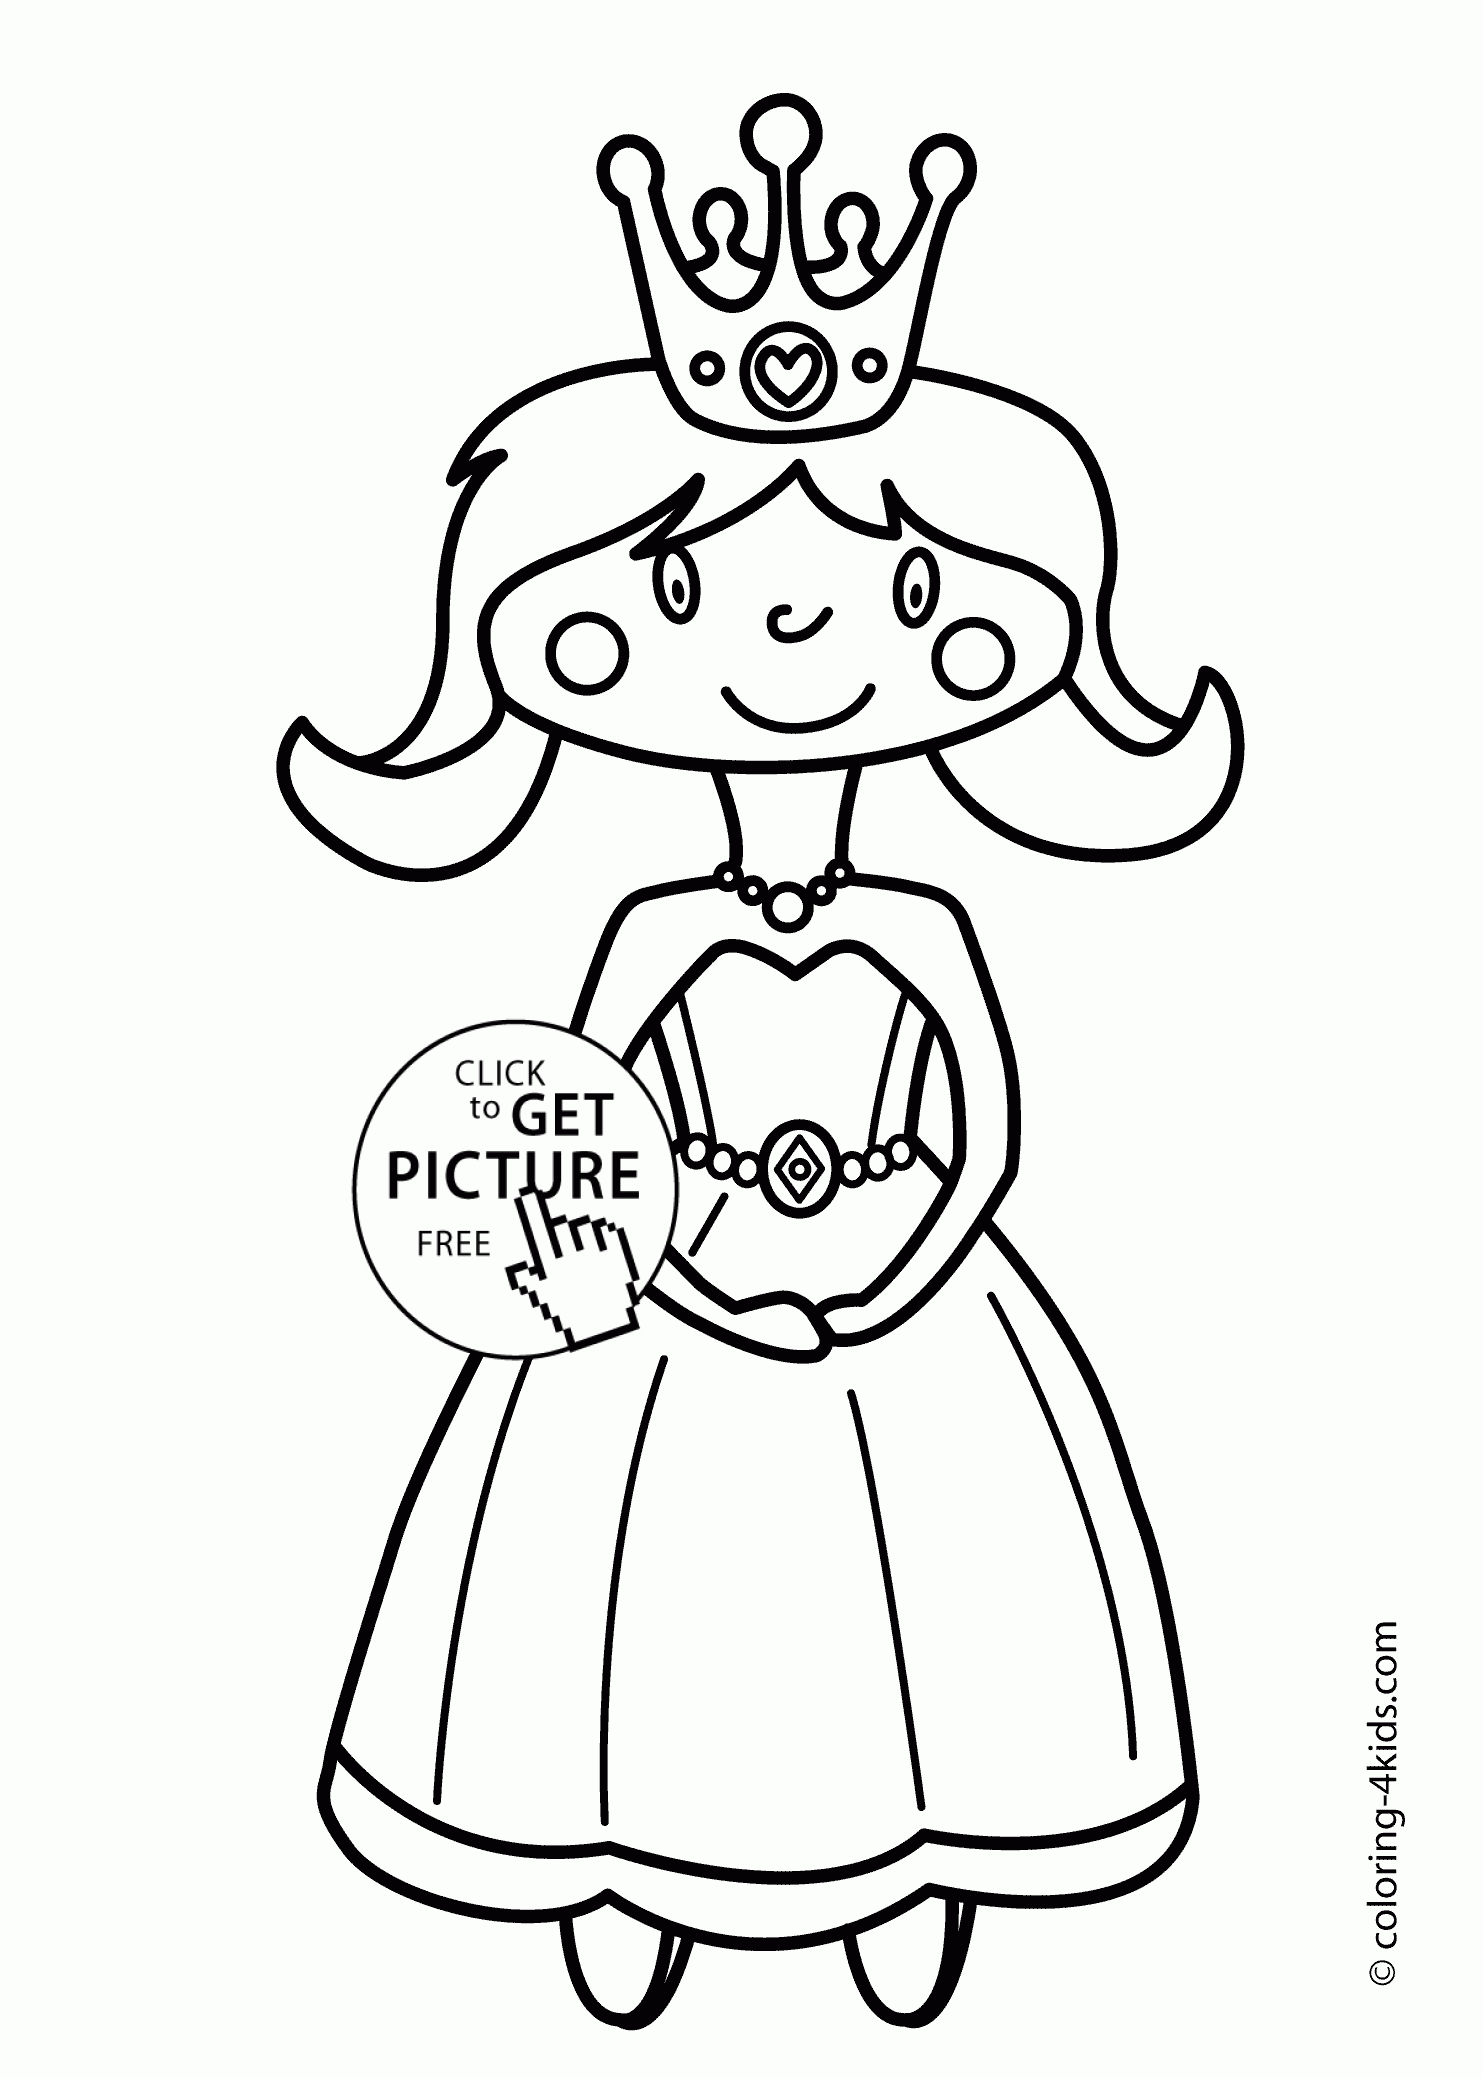 Cute Princesse Coloring Pages For Girls - Printable Coloring Pages - Free Printable Coloring Pages For Girls